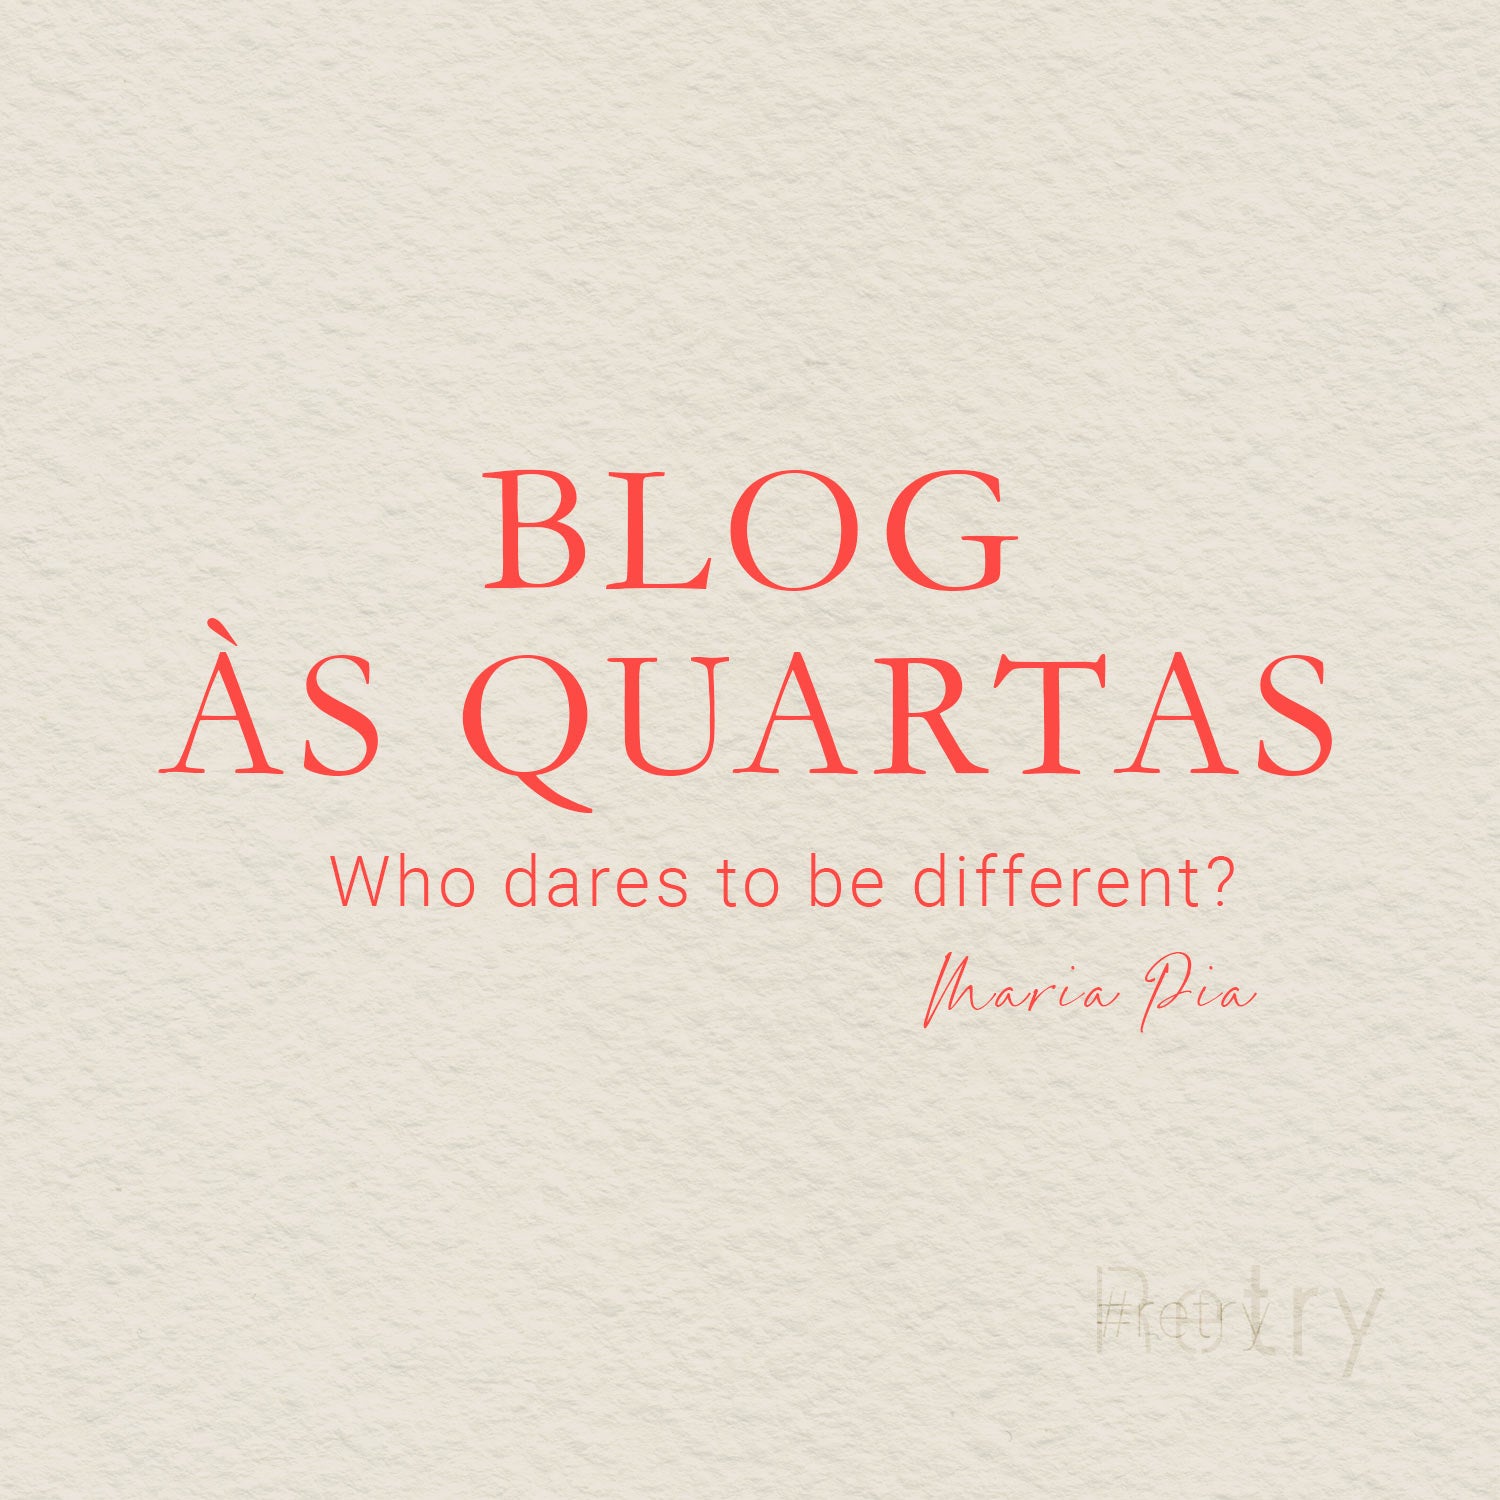 Who dares to be different?